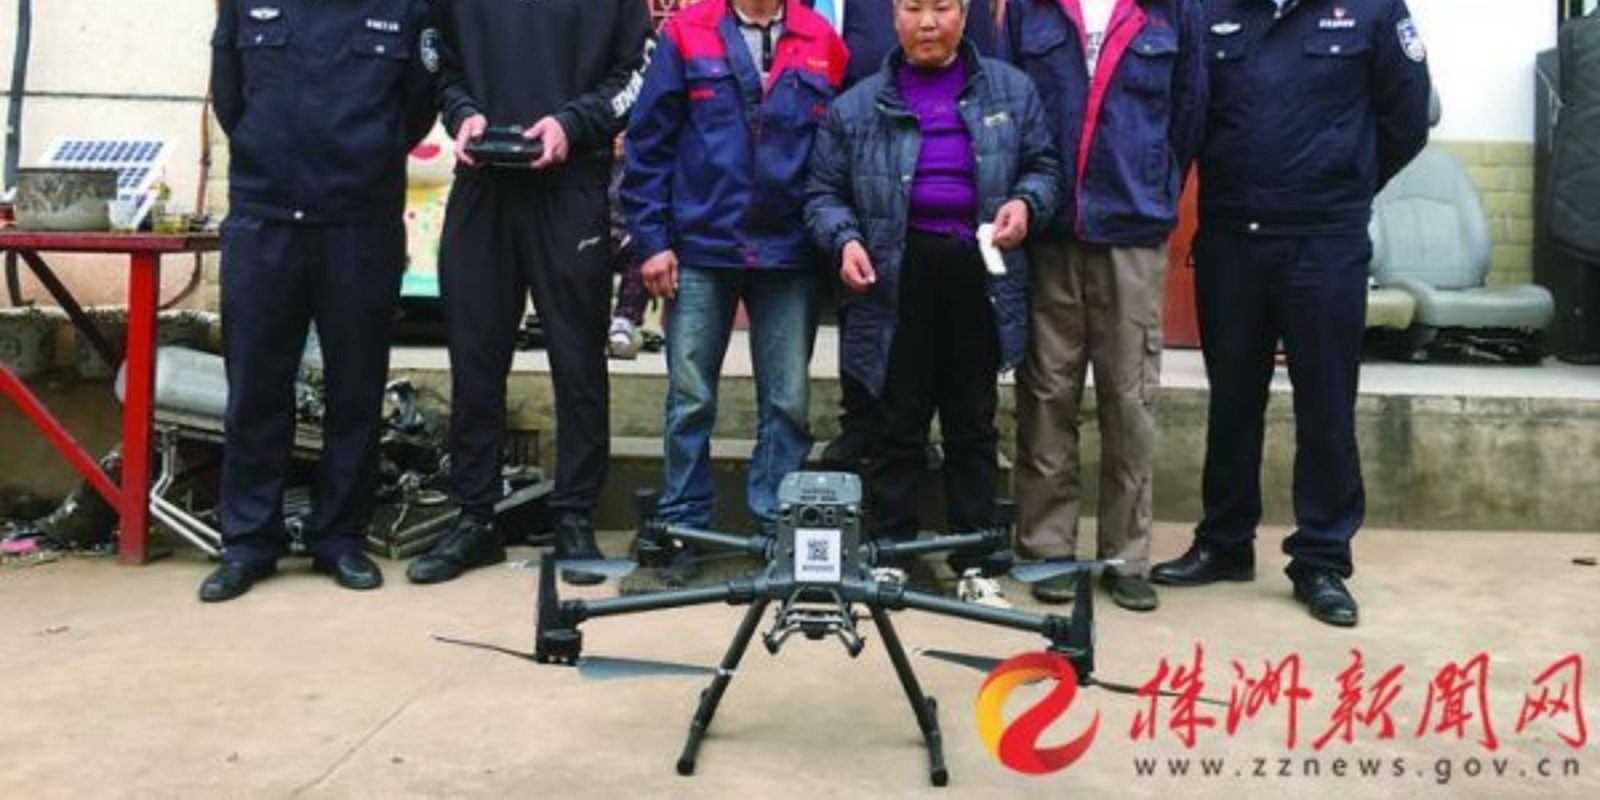 Chinese woman found drone